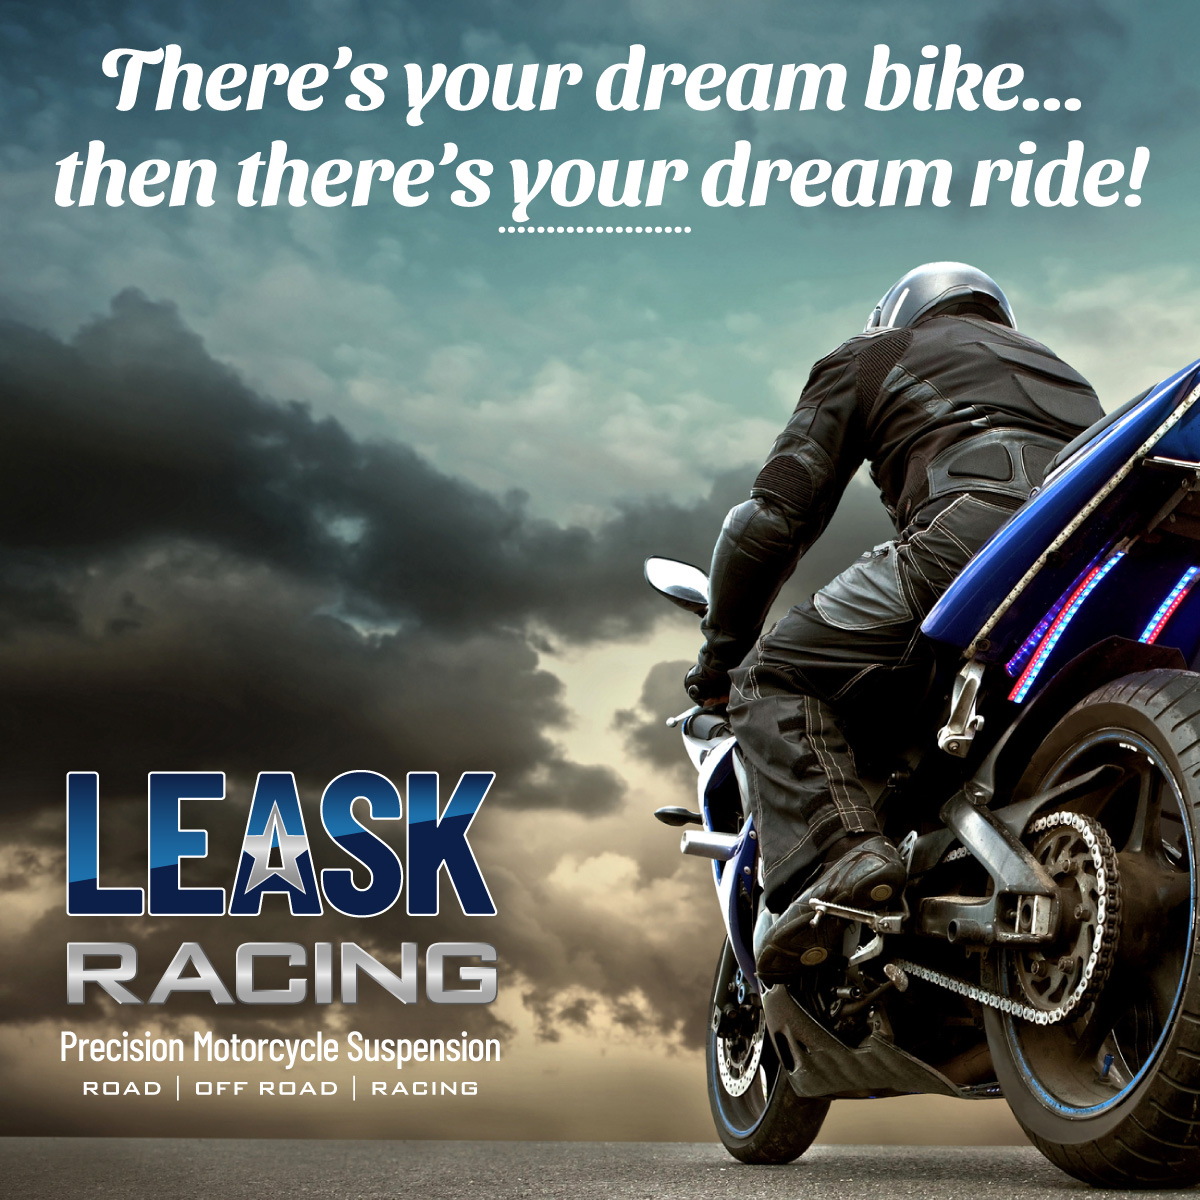 There's your dream bike, then there's your dream ride, with Leask Racing Precision Motorcycle Suspension